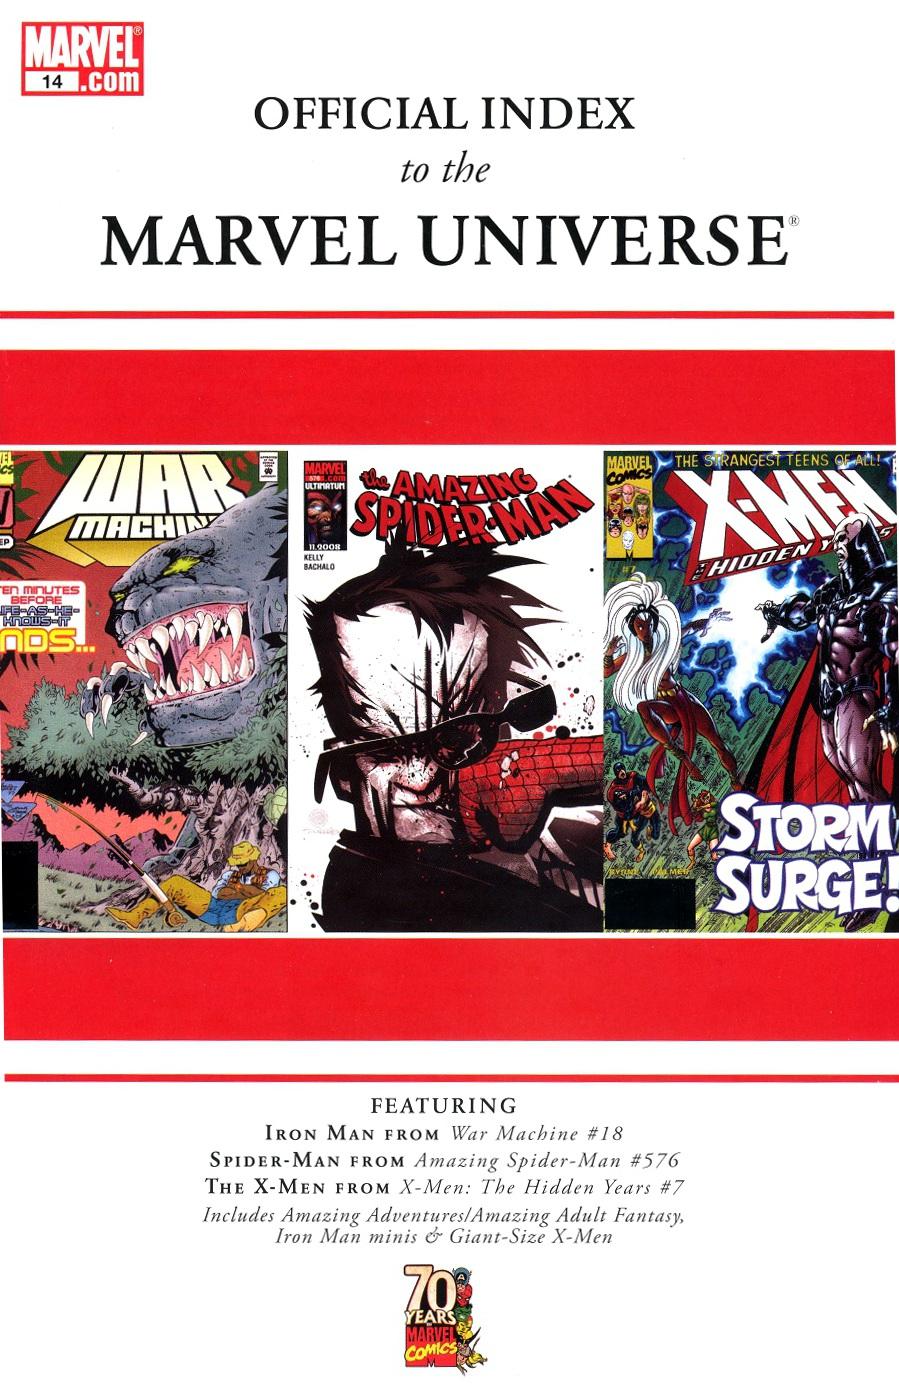 Official Index to the Marvel Universe Vol. 1 #14